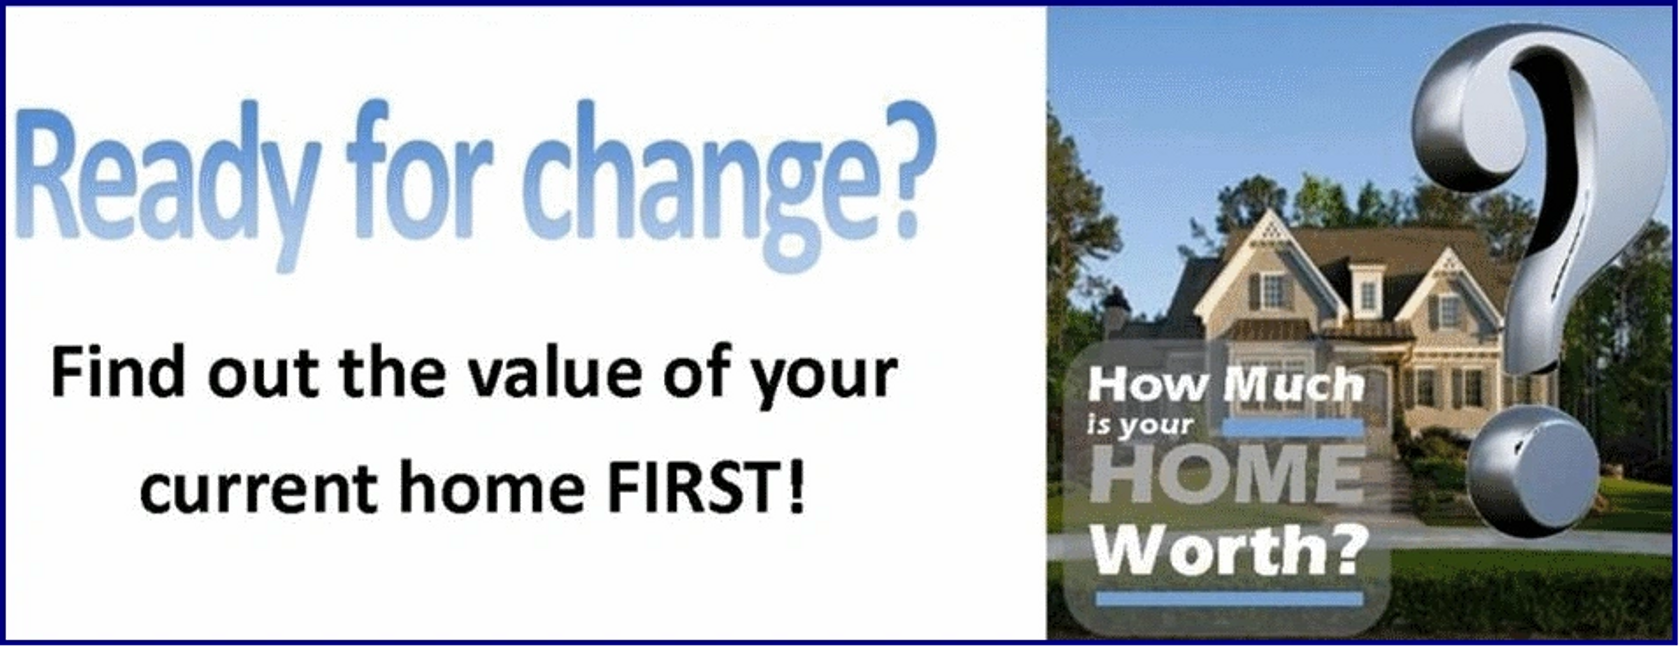 What Is Your Home Worth?
Value Of Your Home